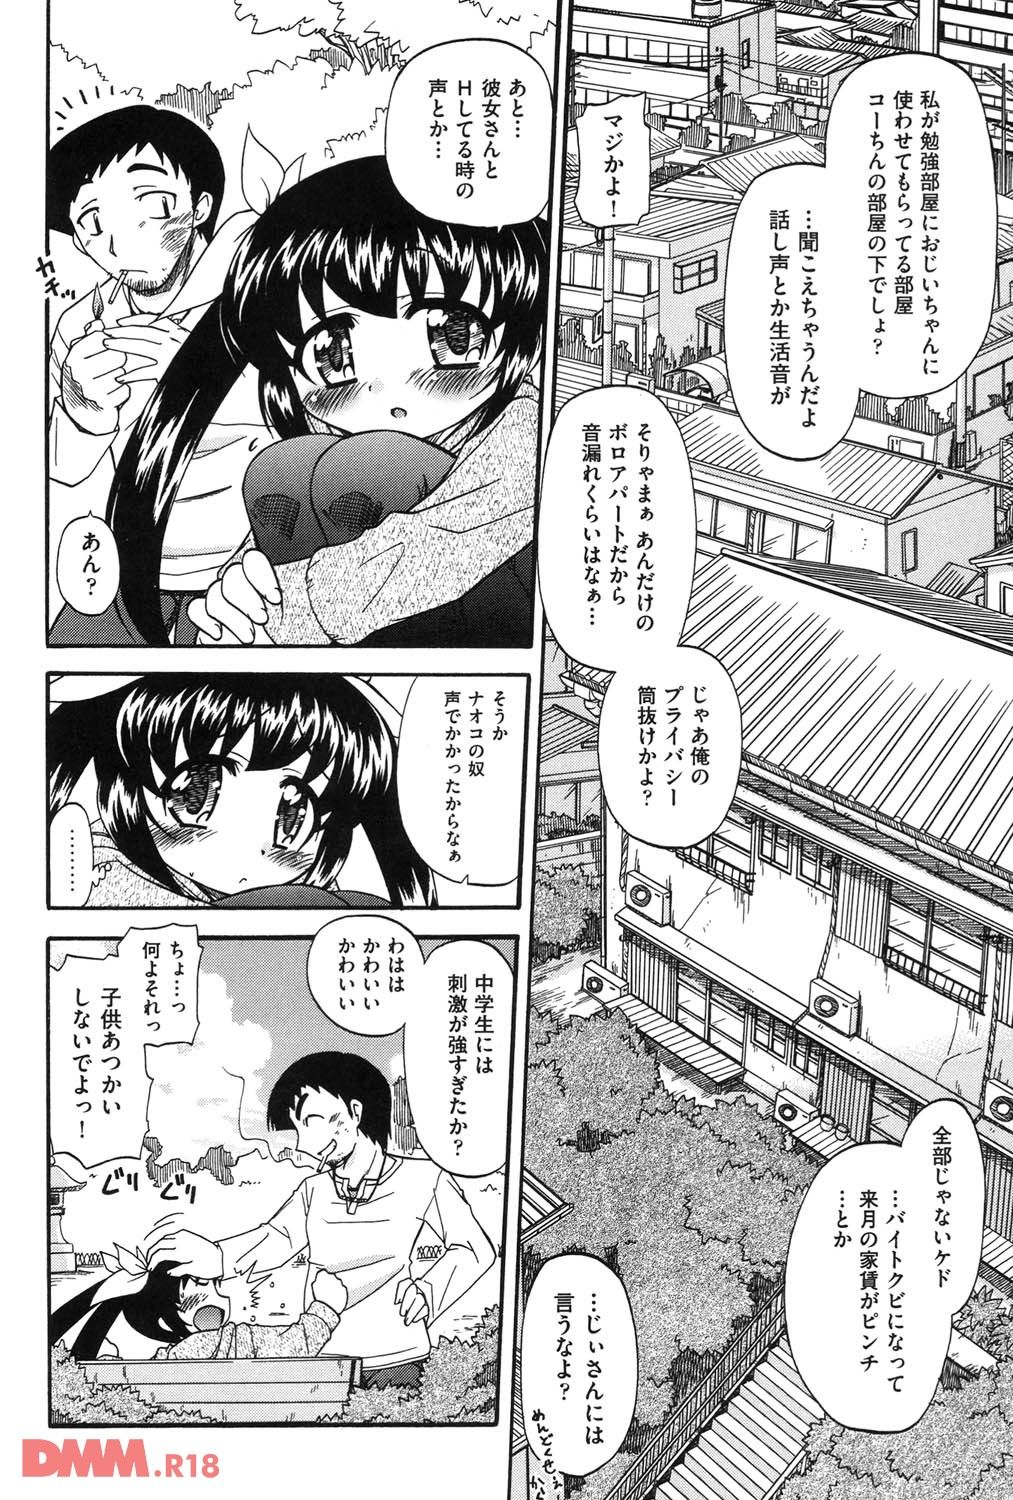 "Persistent lie." "this sex c." I got have sex? "It's words in a consensual and boyfriend say she's rare wwwwww 3